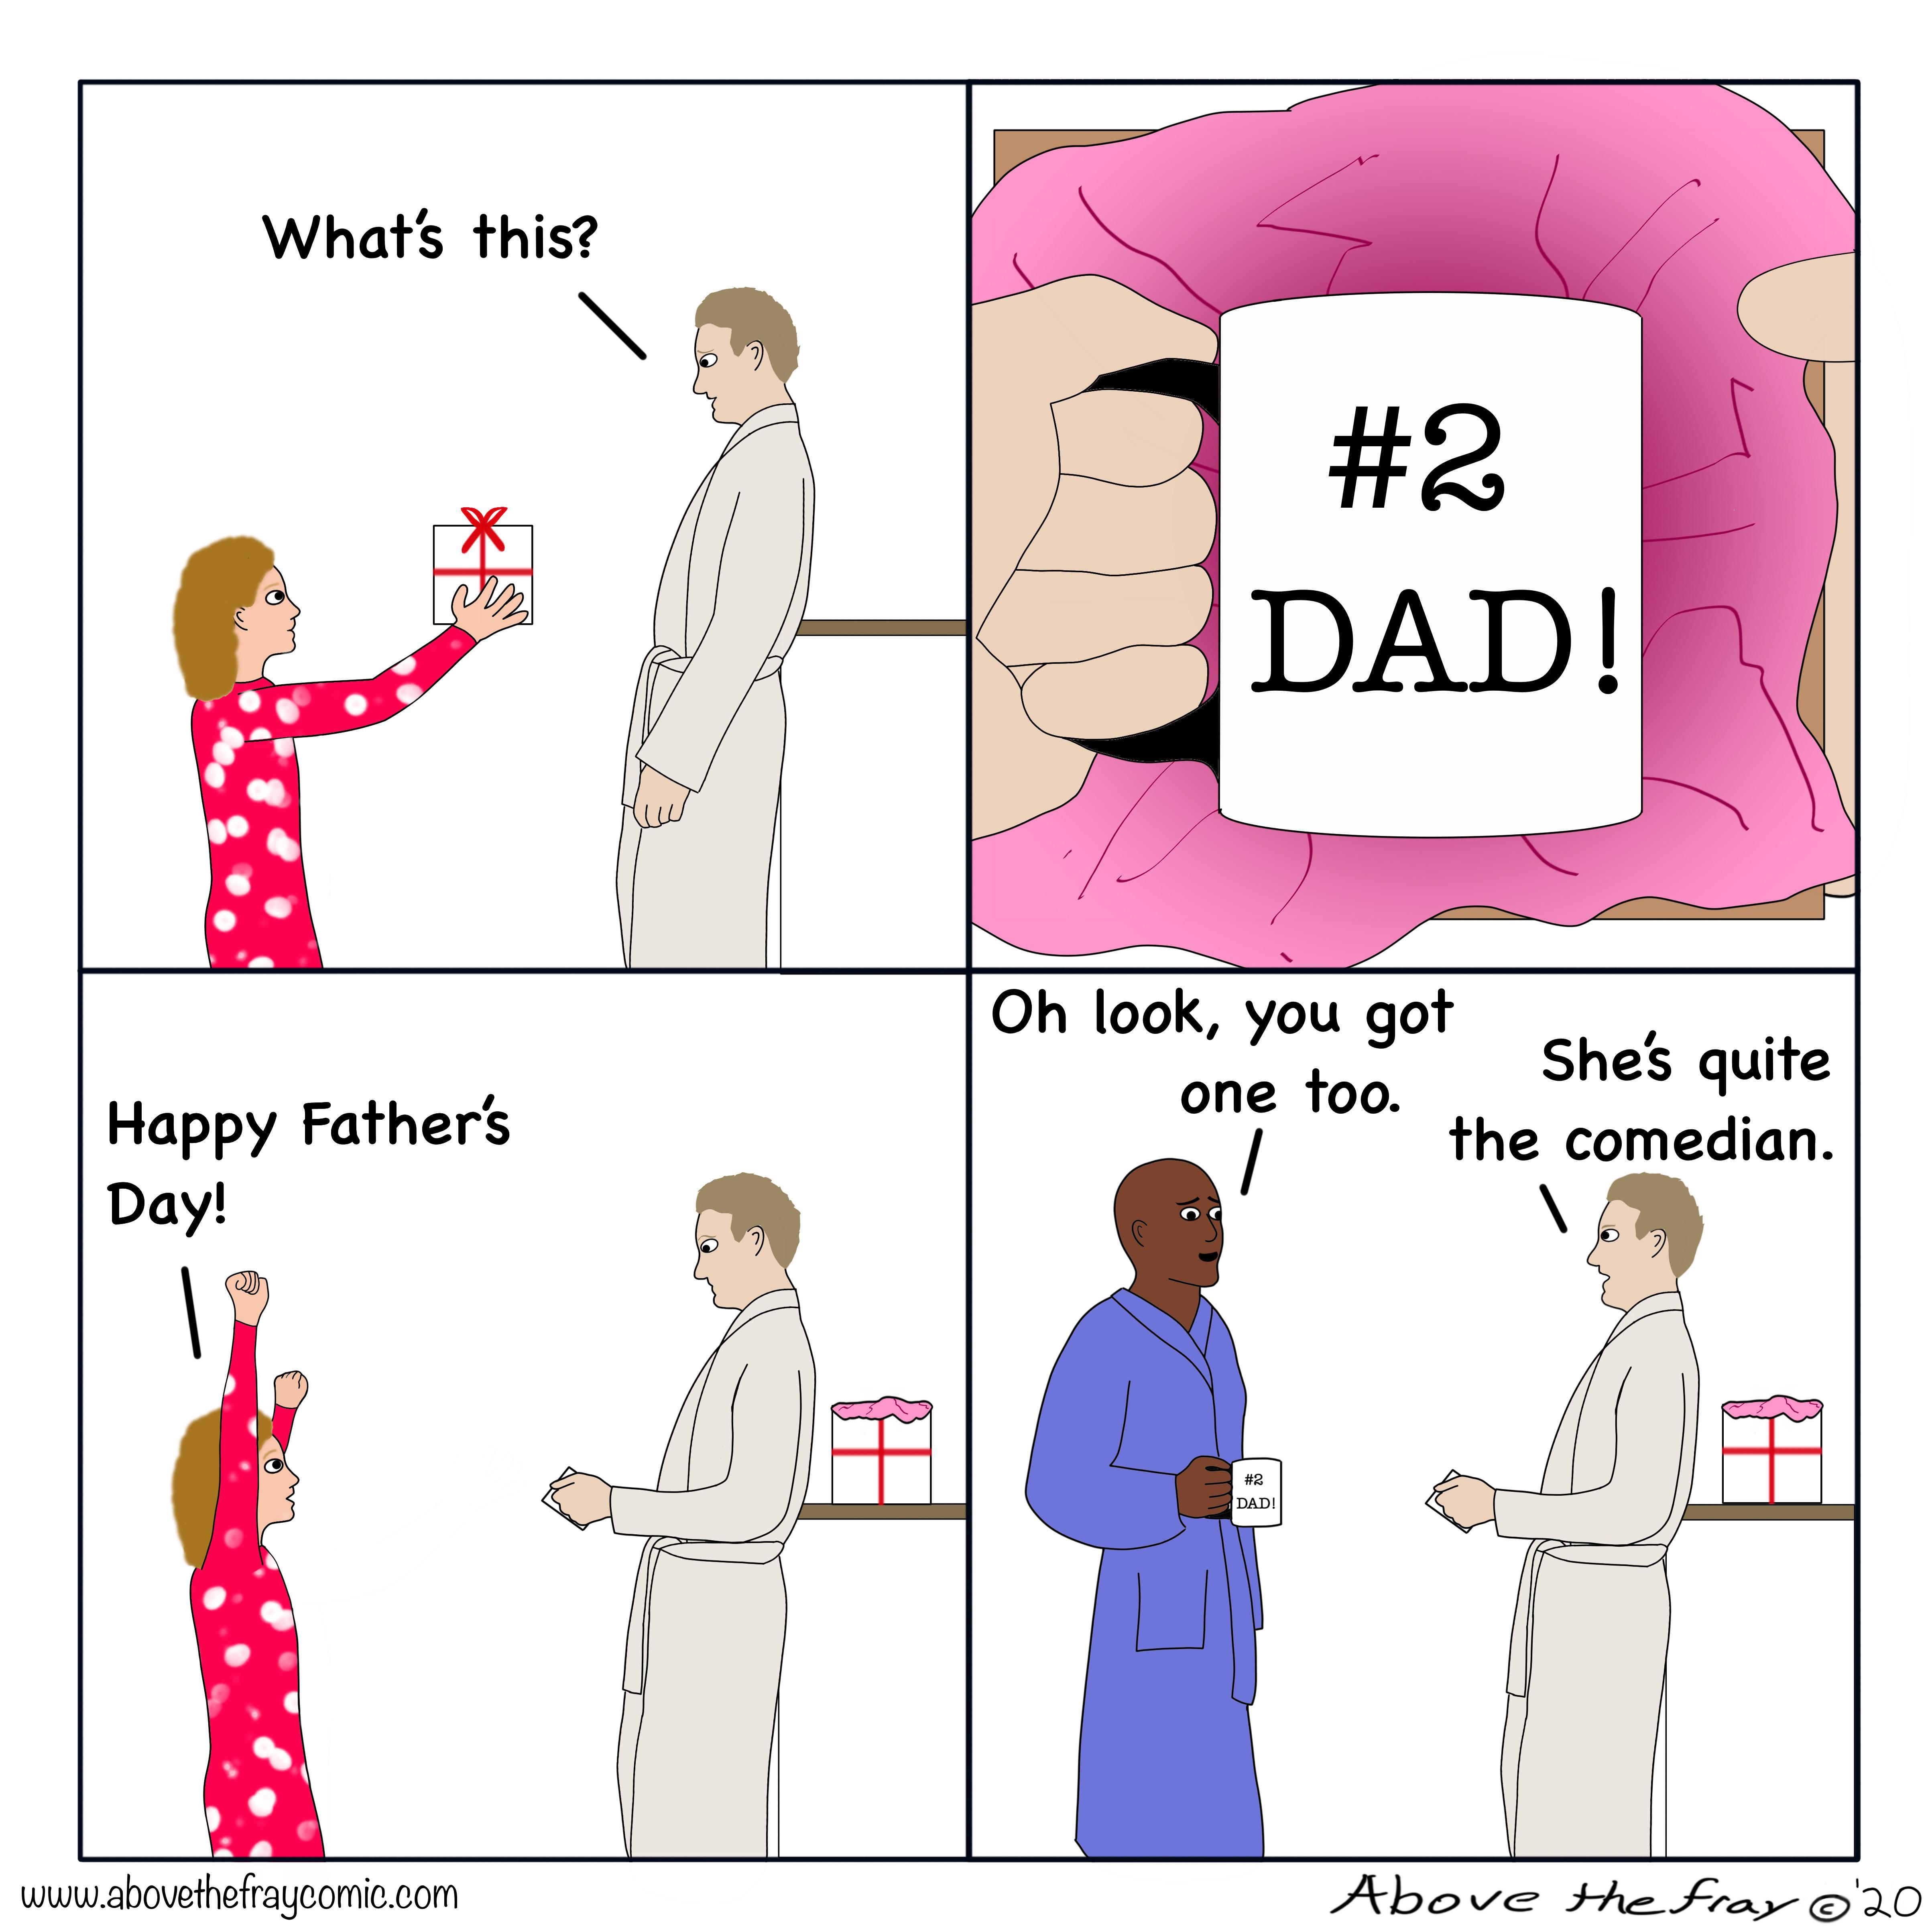 Happy Proud Father’s Day!